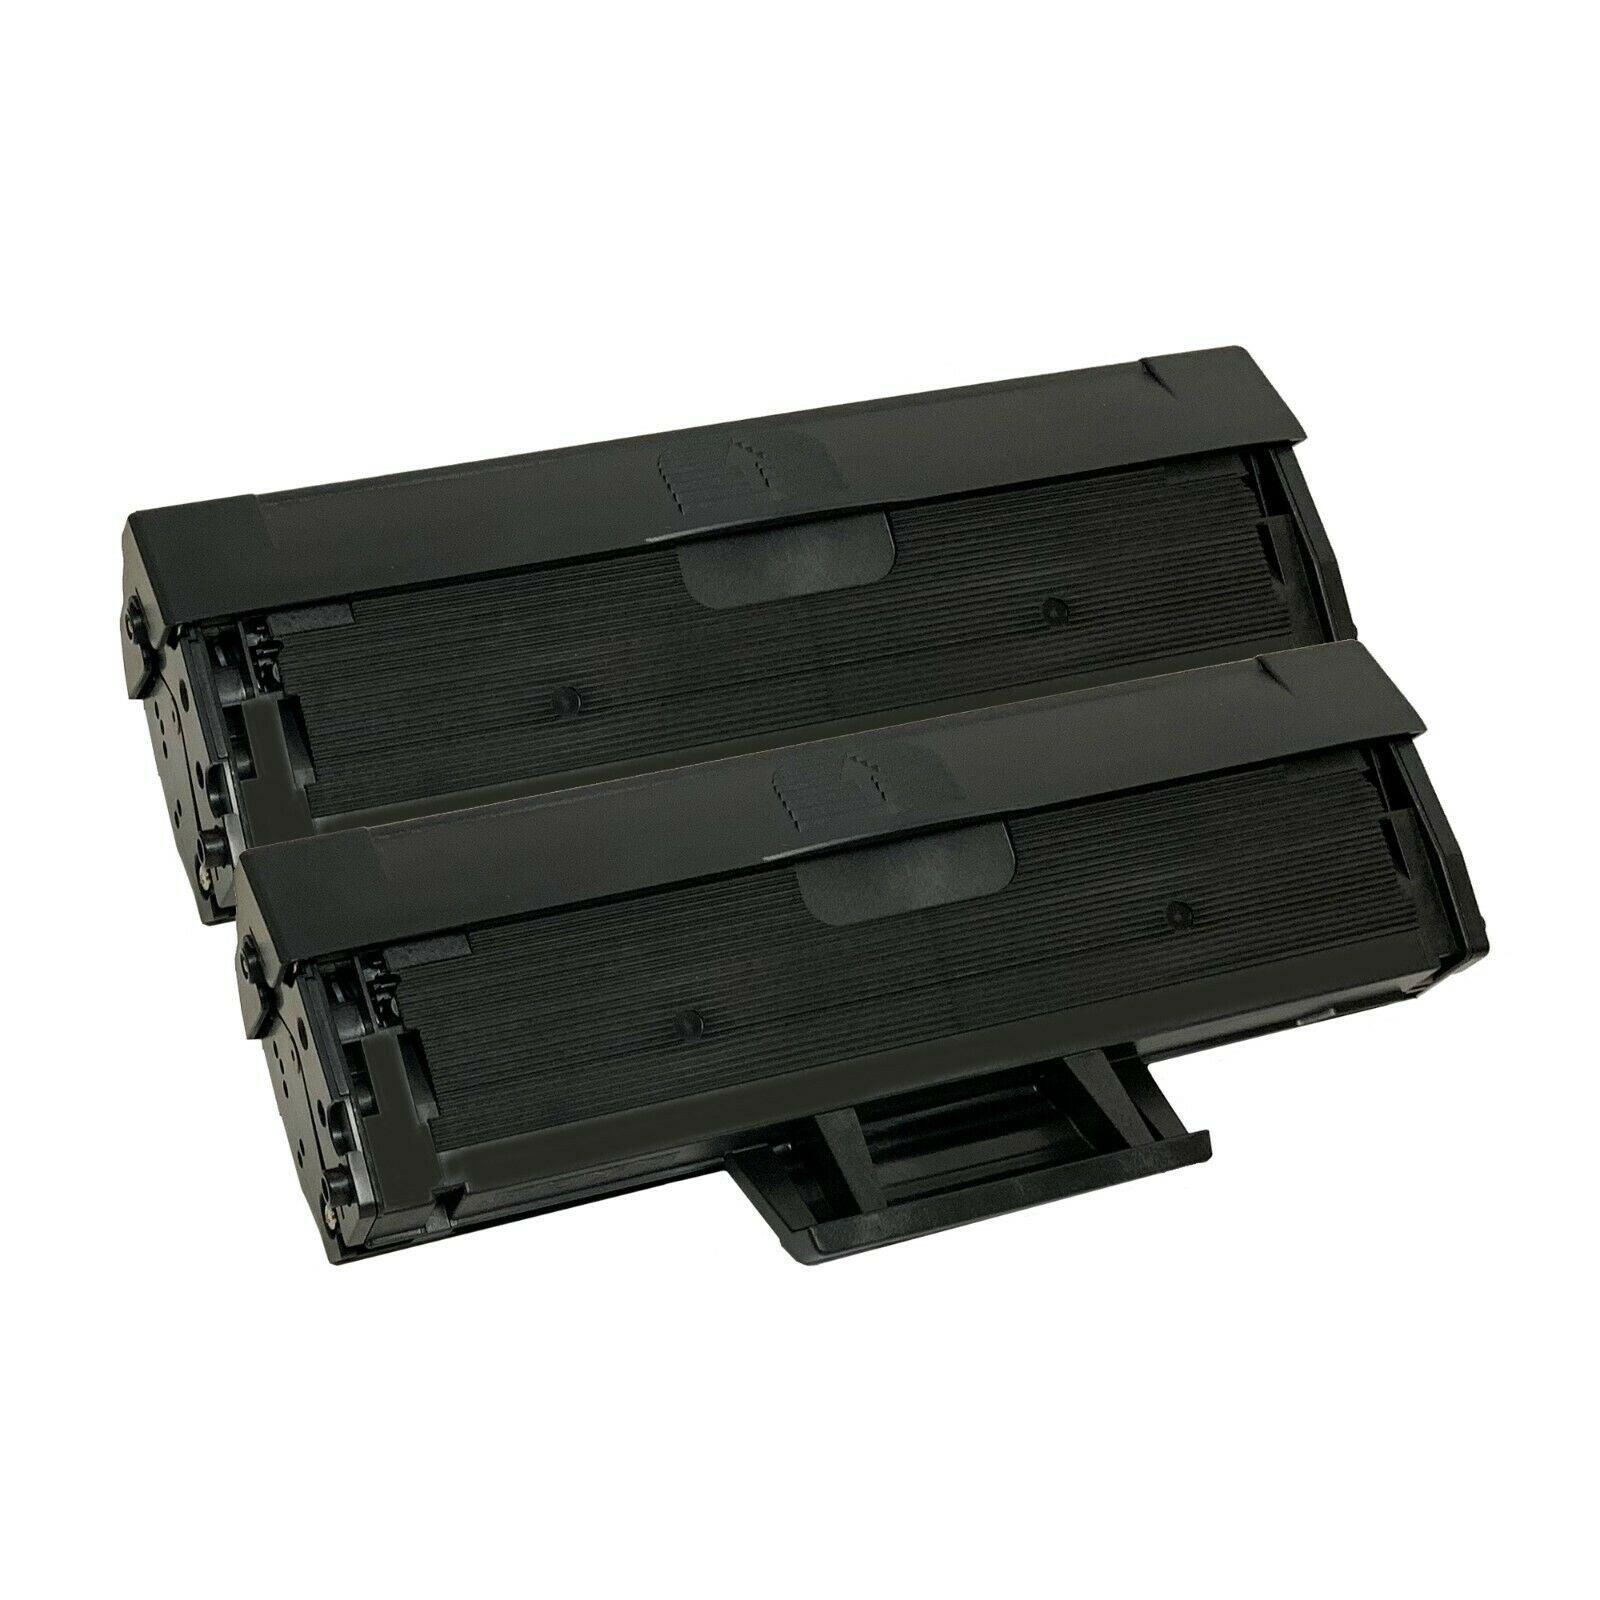 Samsung ML2160/2165W, SCX3405F/FW (MLT-D101S 101) Compatible Black Toner Cartridge SU698A - 1,500 pages - Office Catch